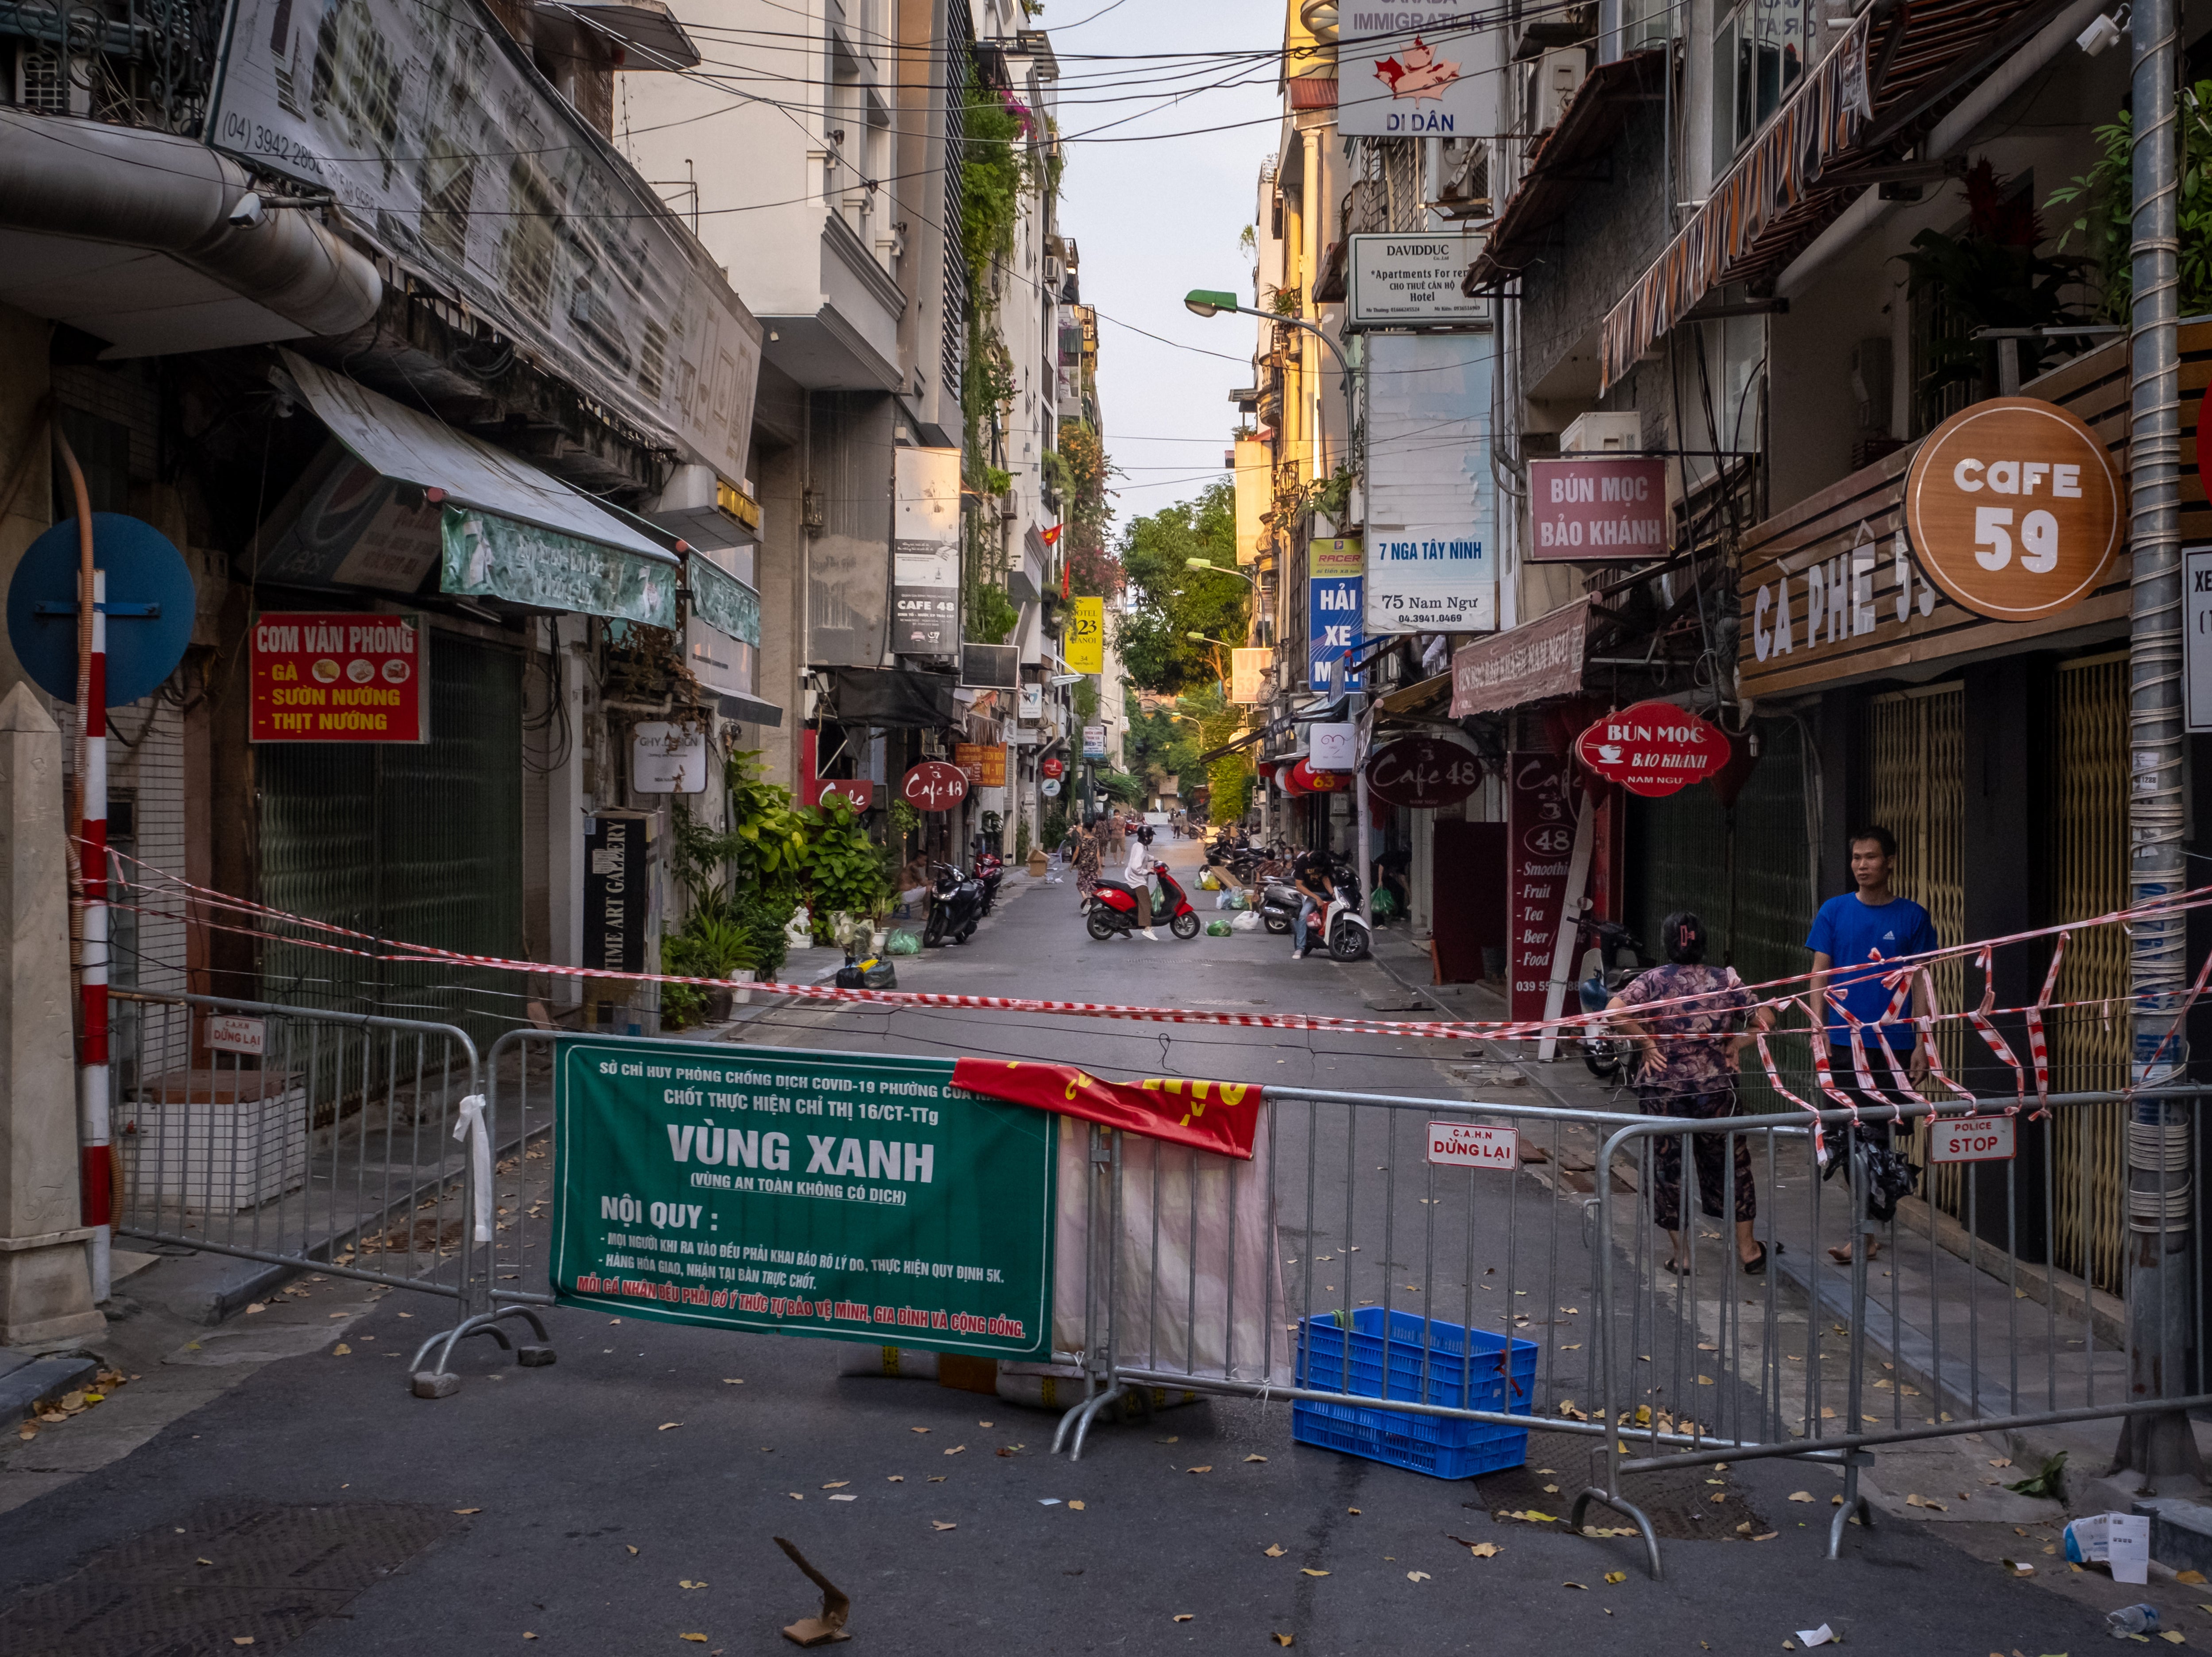 Lockdown restrictions on movement have been imposed across Vietnam as the country grapples with a fresh spike in Covid cases